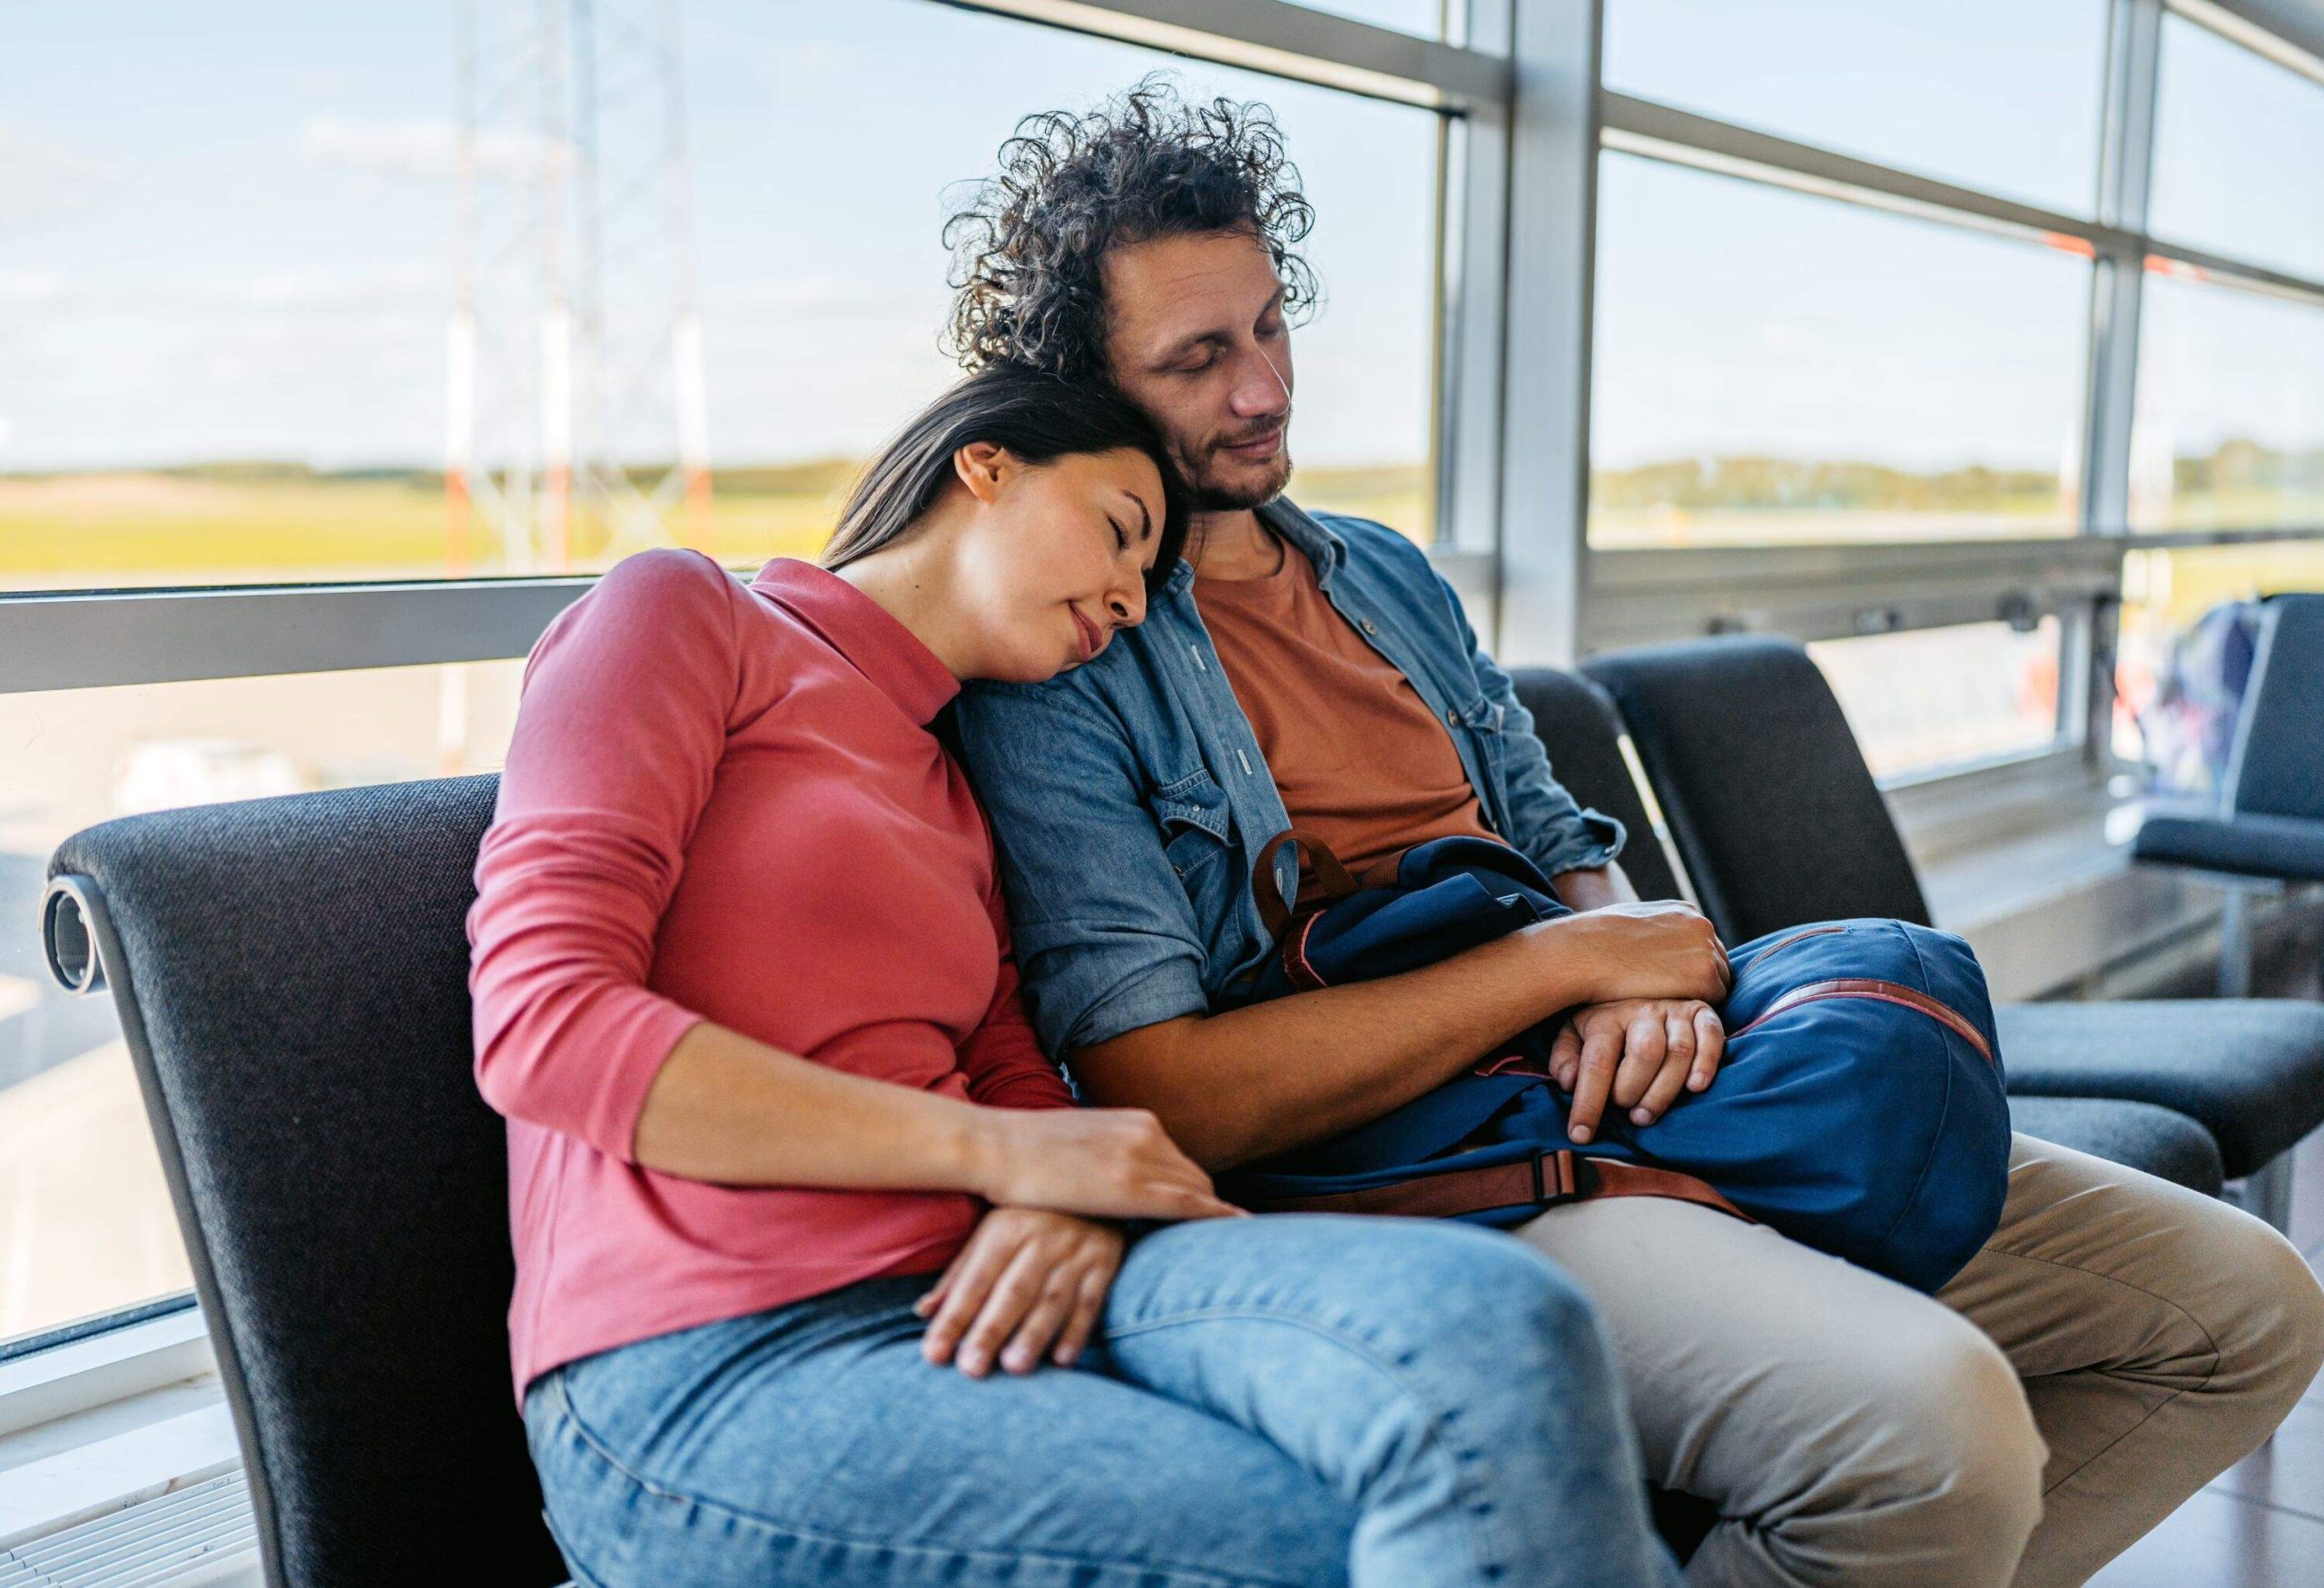 Beautiful young couple napping at the airport in Malmo, Sweden.